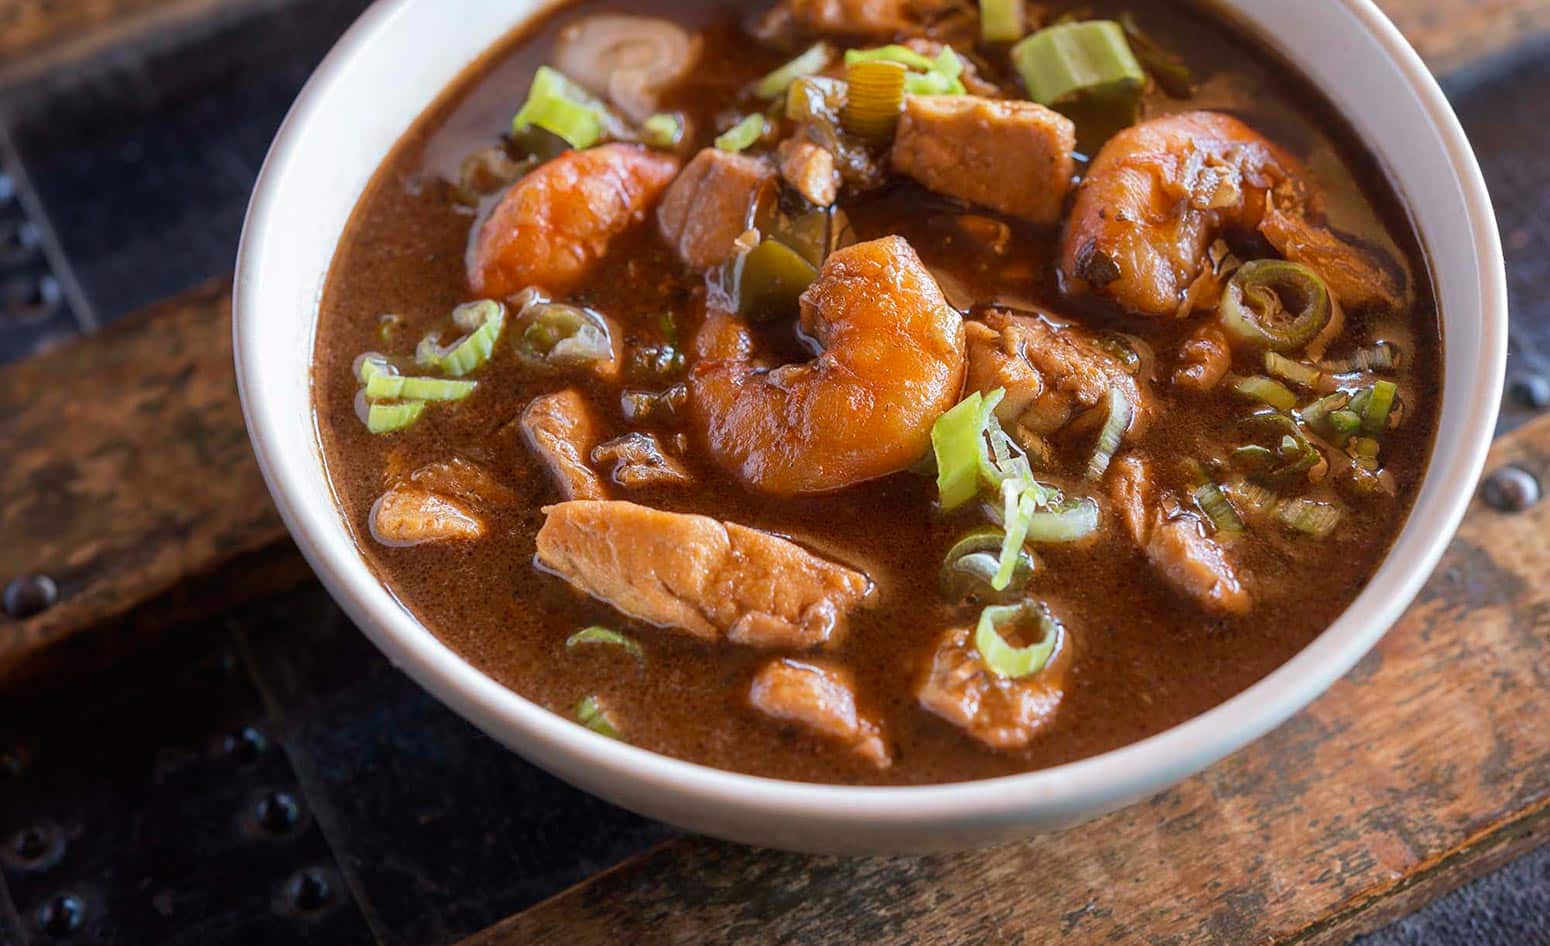 Seafood Gumbo Recipe Seafood Gumbo With Shrimp And Fish,Instant Pod Coffee And Espresso Maker